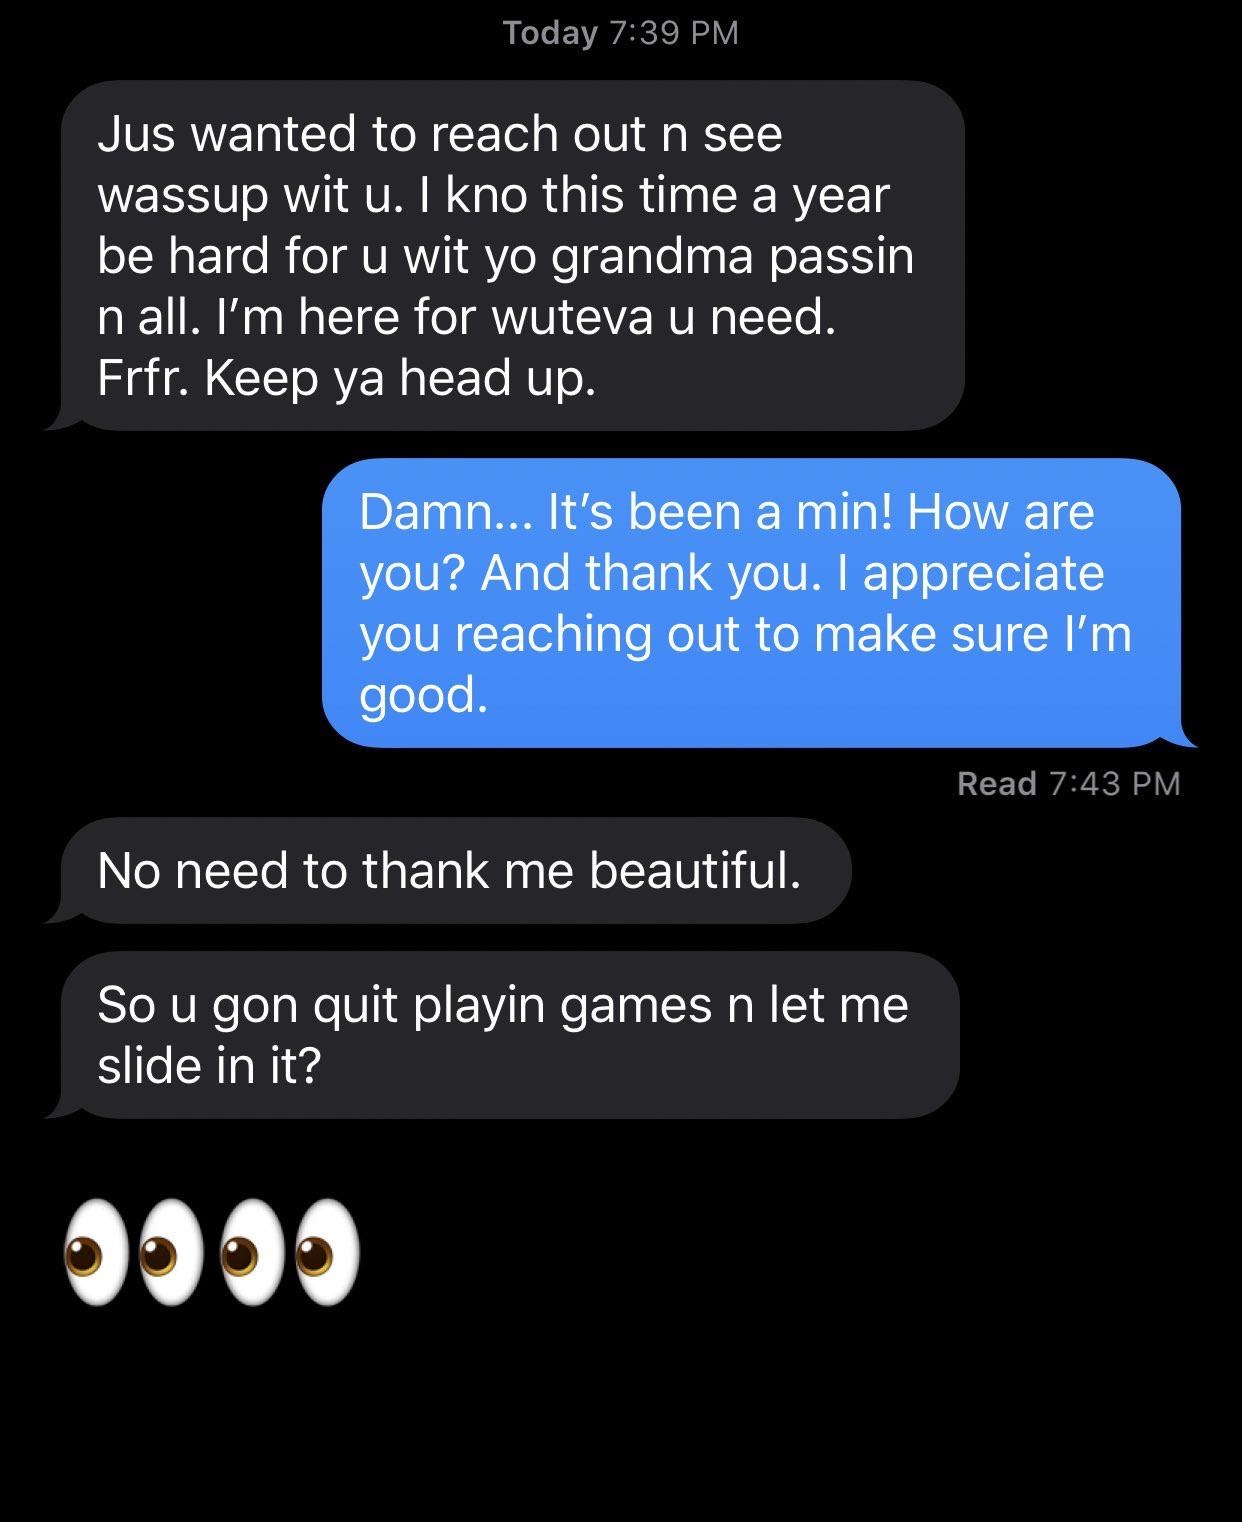 screenshot - Today Jus wanted to reach out n see wassup wit u. I kno this time a year be hard for u wit yo grandma passin in all. I'm here for wuteva u need. Frfr. Keep ya head up. Damn... It's been a min! How are you? And thank you. I appreciate you reac